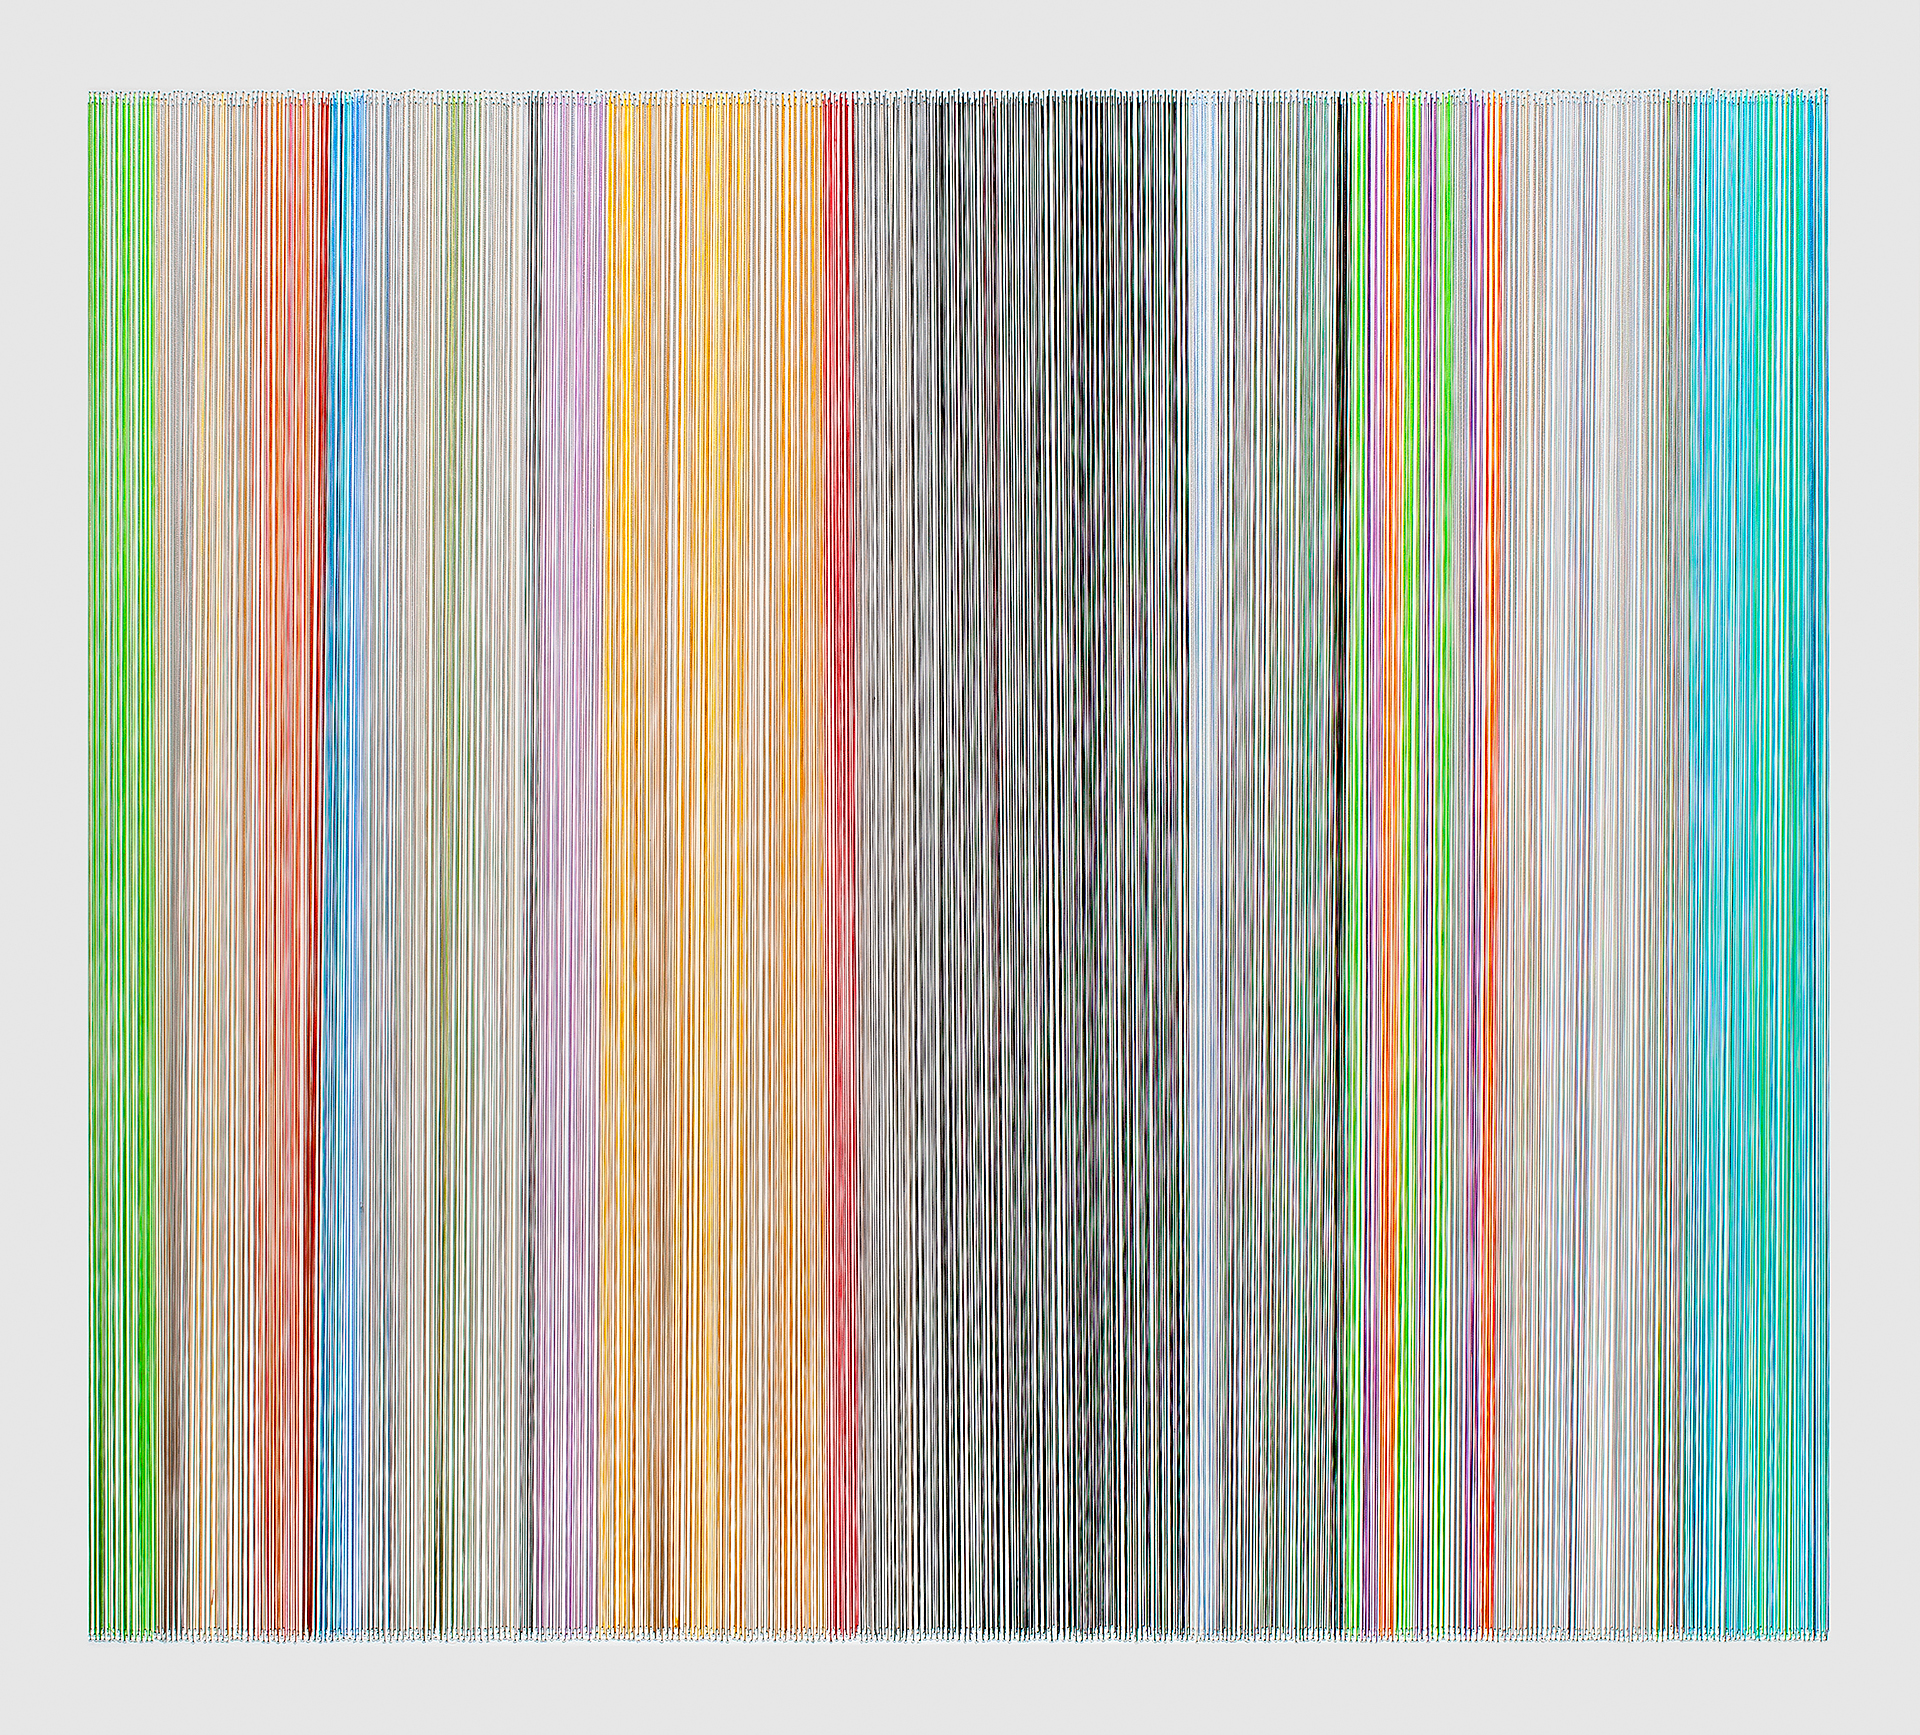    thread drawing 14   2012 rayon thread 28 x 31 inches Collection of C3, Kansas City, Missouri 